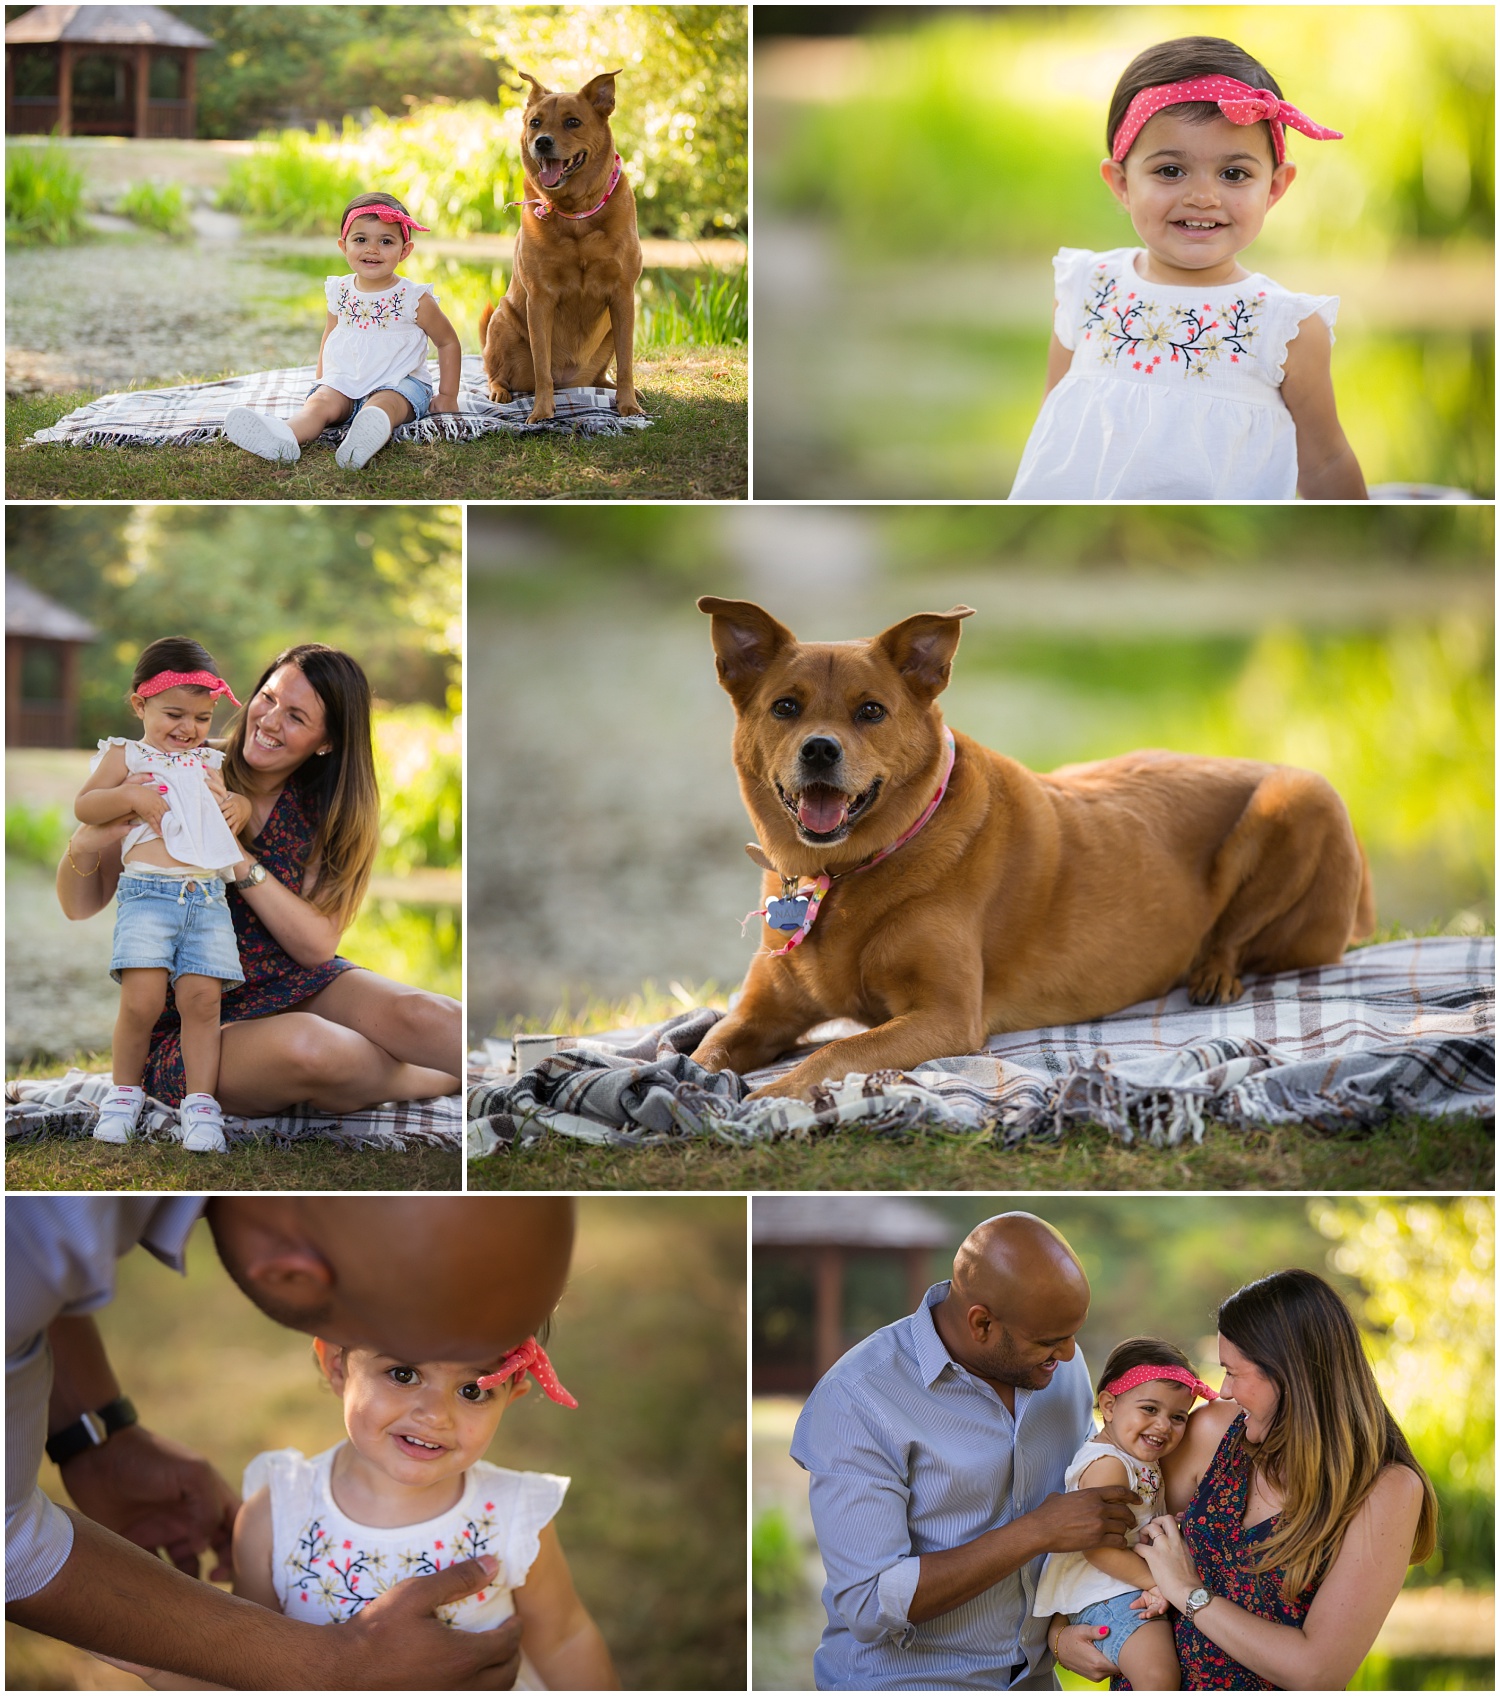 Amazing Day Photography - Langley Family Photographer - Campbell Valley Park Family Session (1).jpg